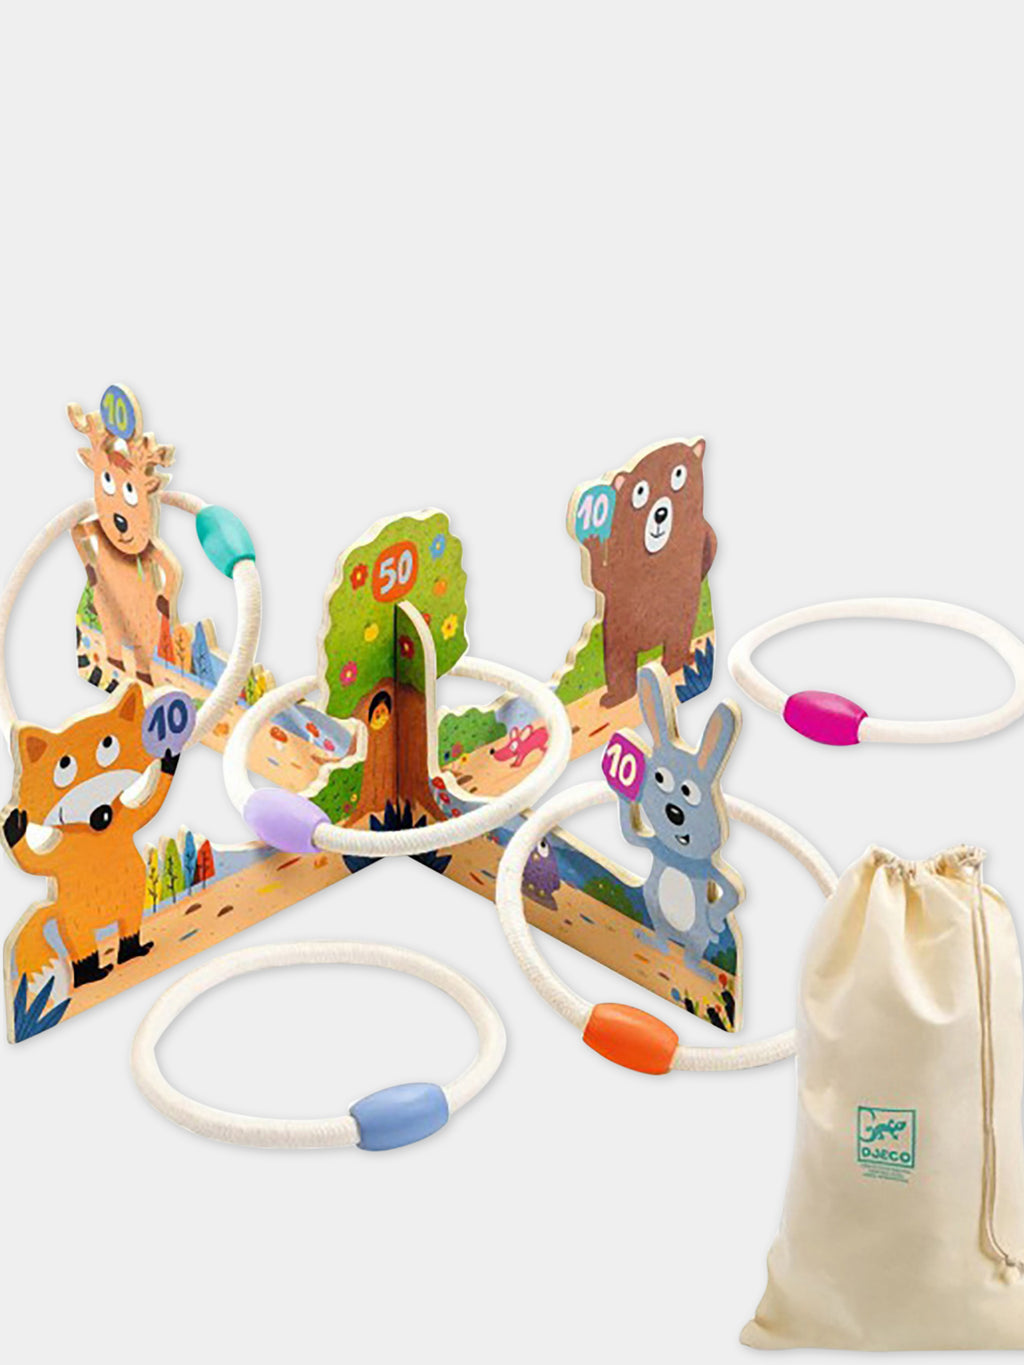 Ring-toss game for kids with animals